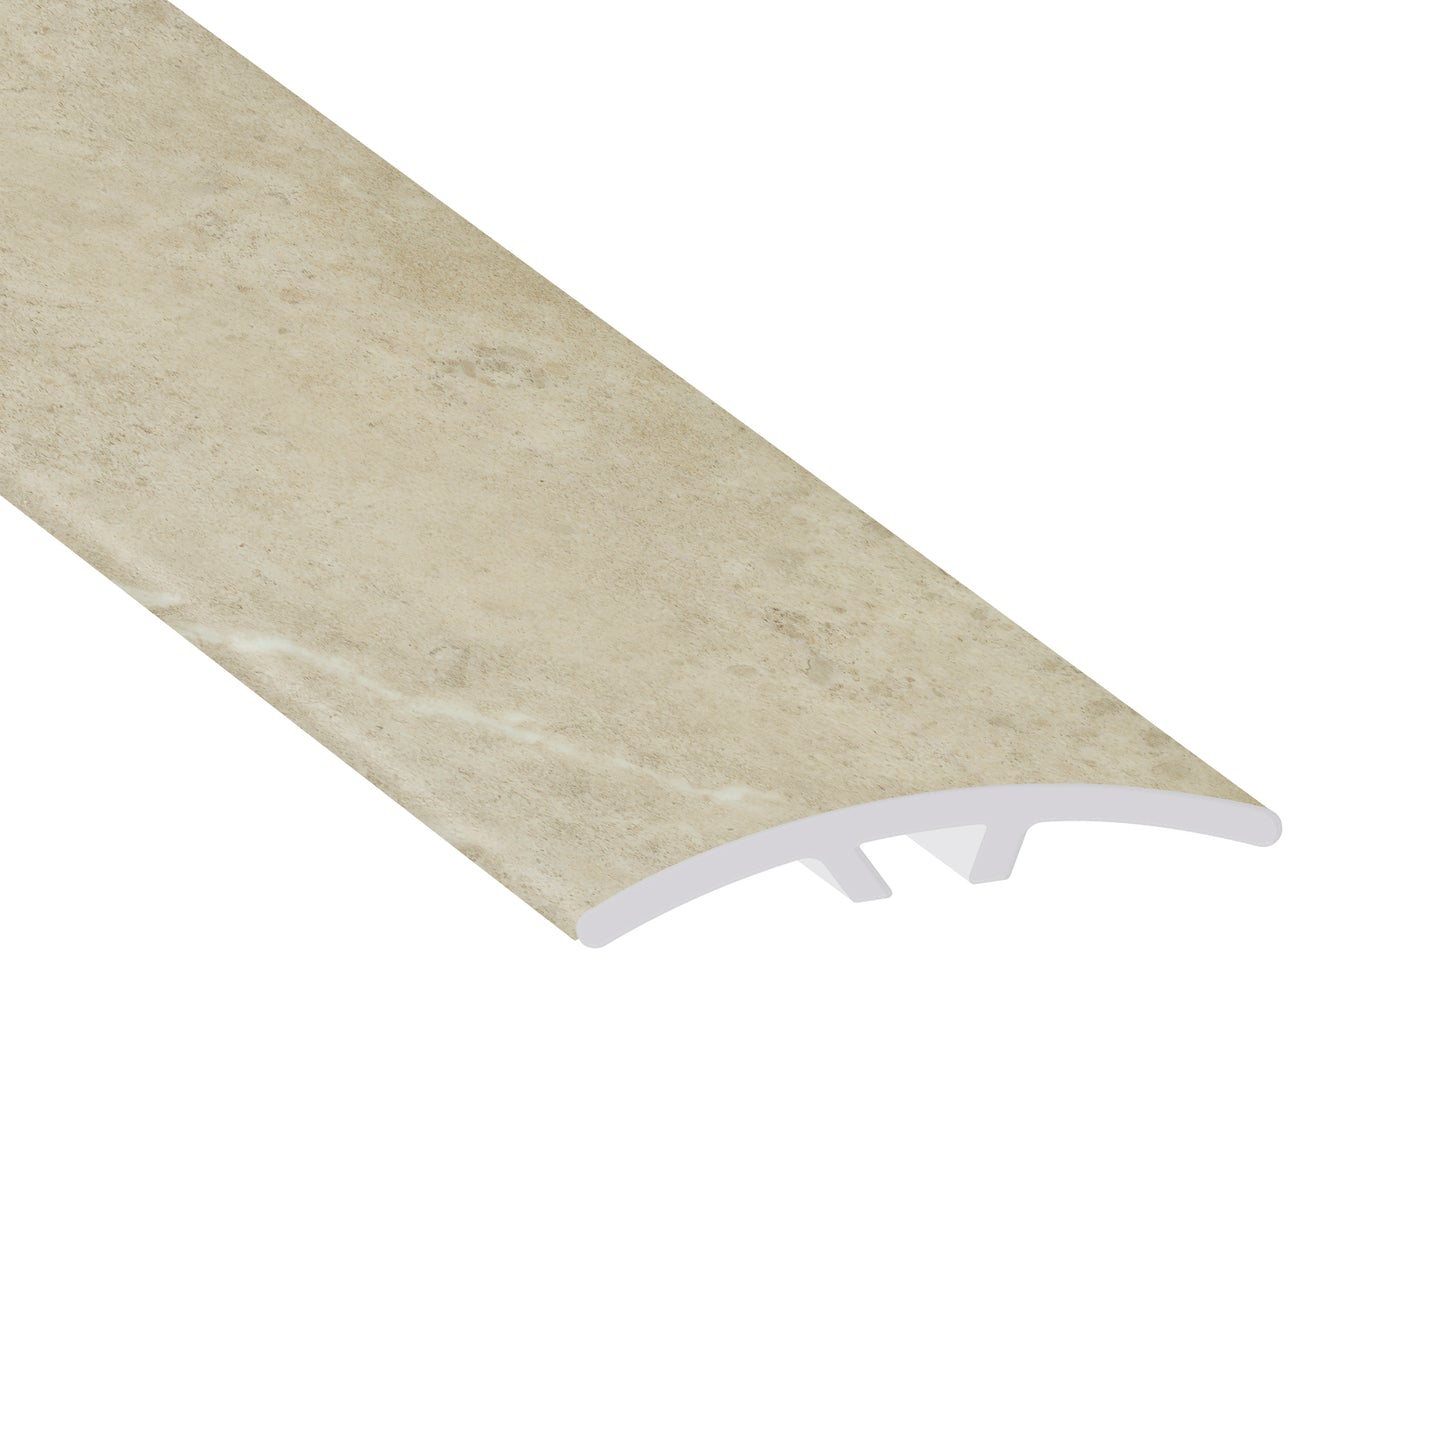 Ainslie Sandstone 0.23 in. Thich x 1.59 in. Width x 94 in. Length Multi-Purpose Reducer Vinyl Molding